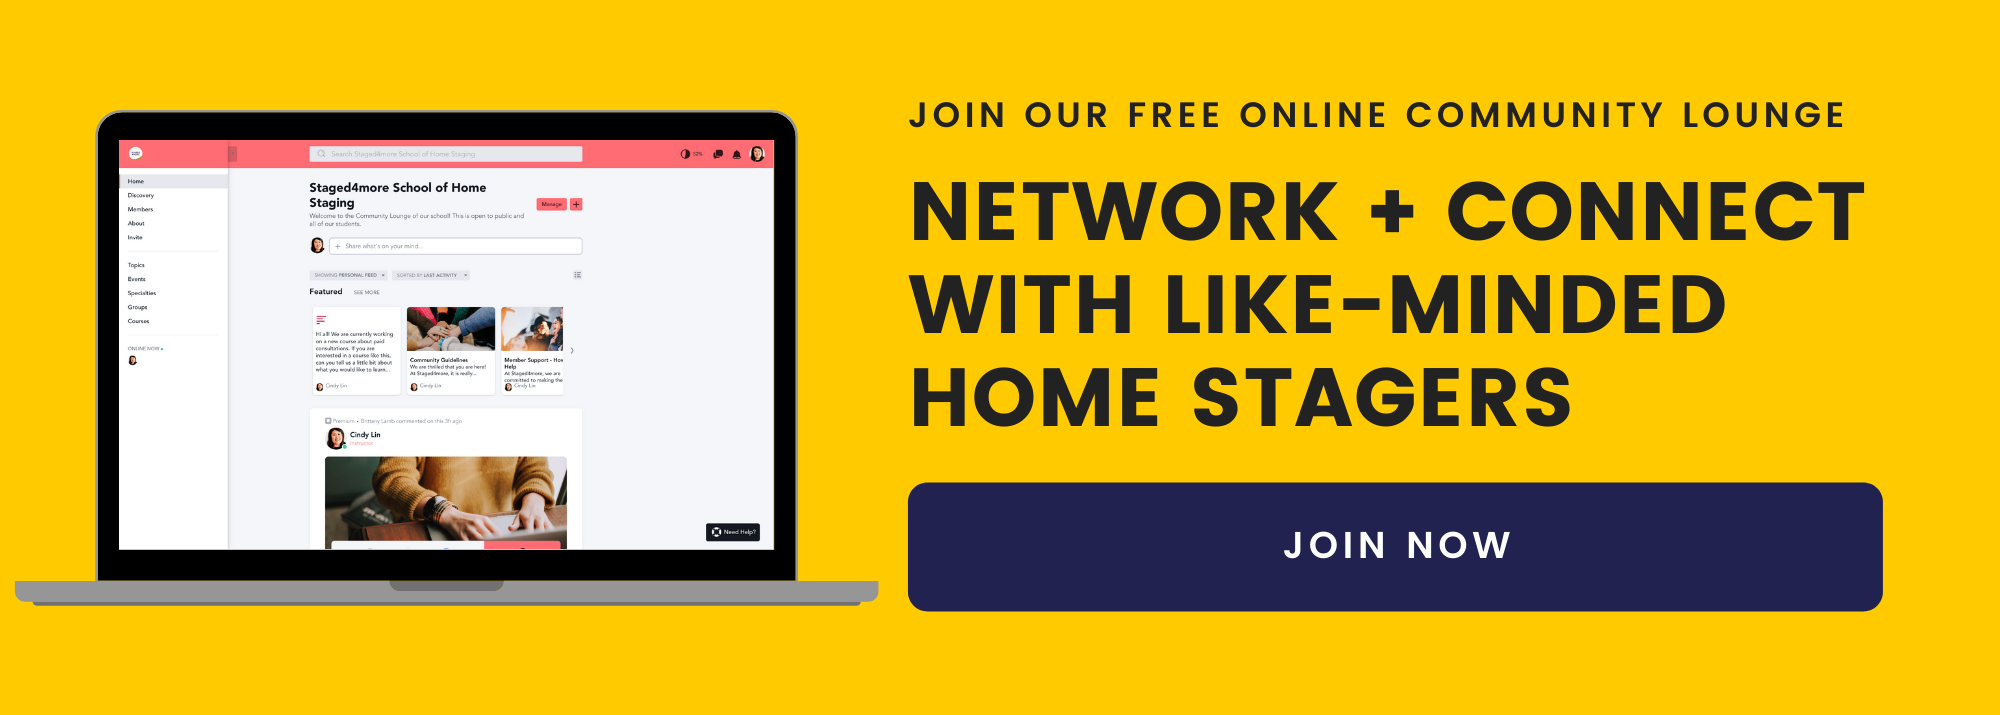 Join Staged4more's Free Online Community for Home Stagers